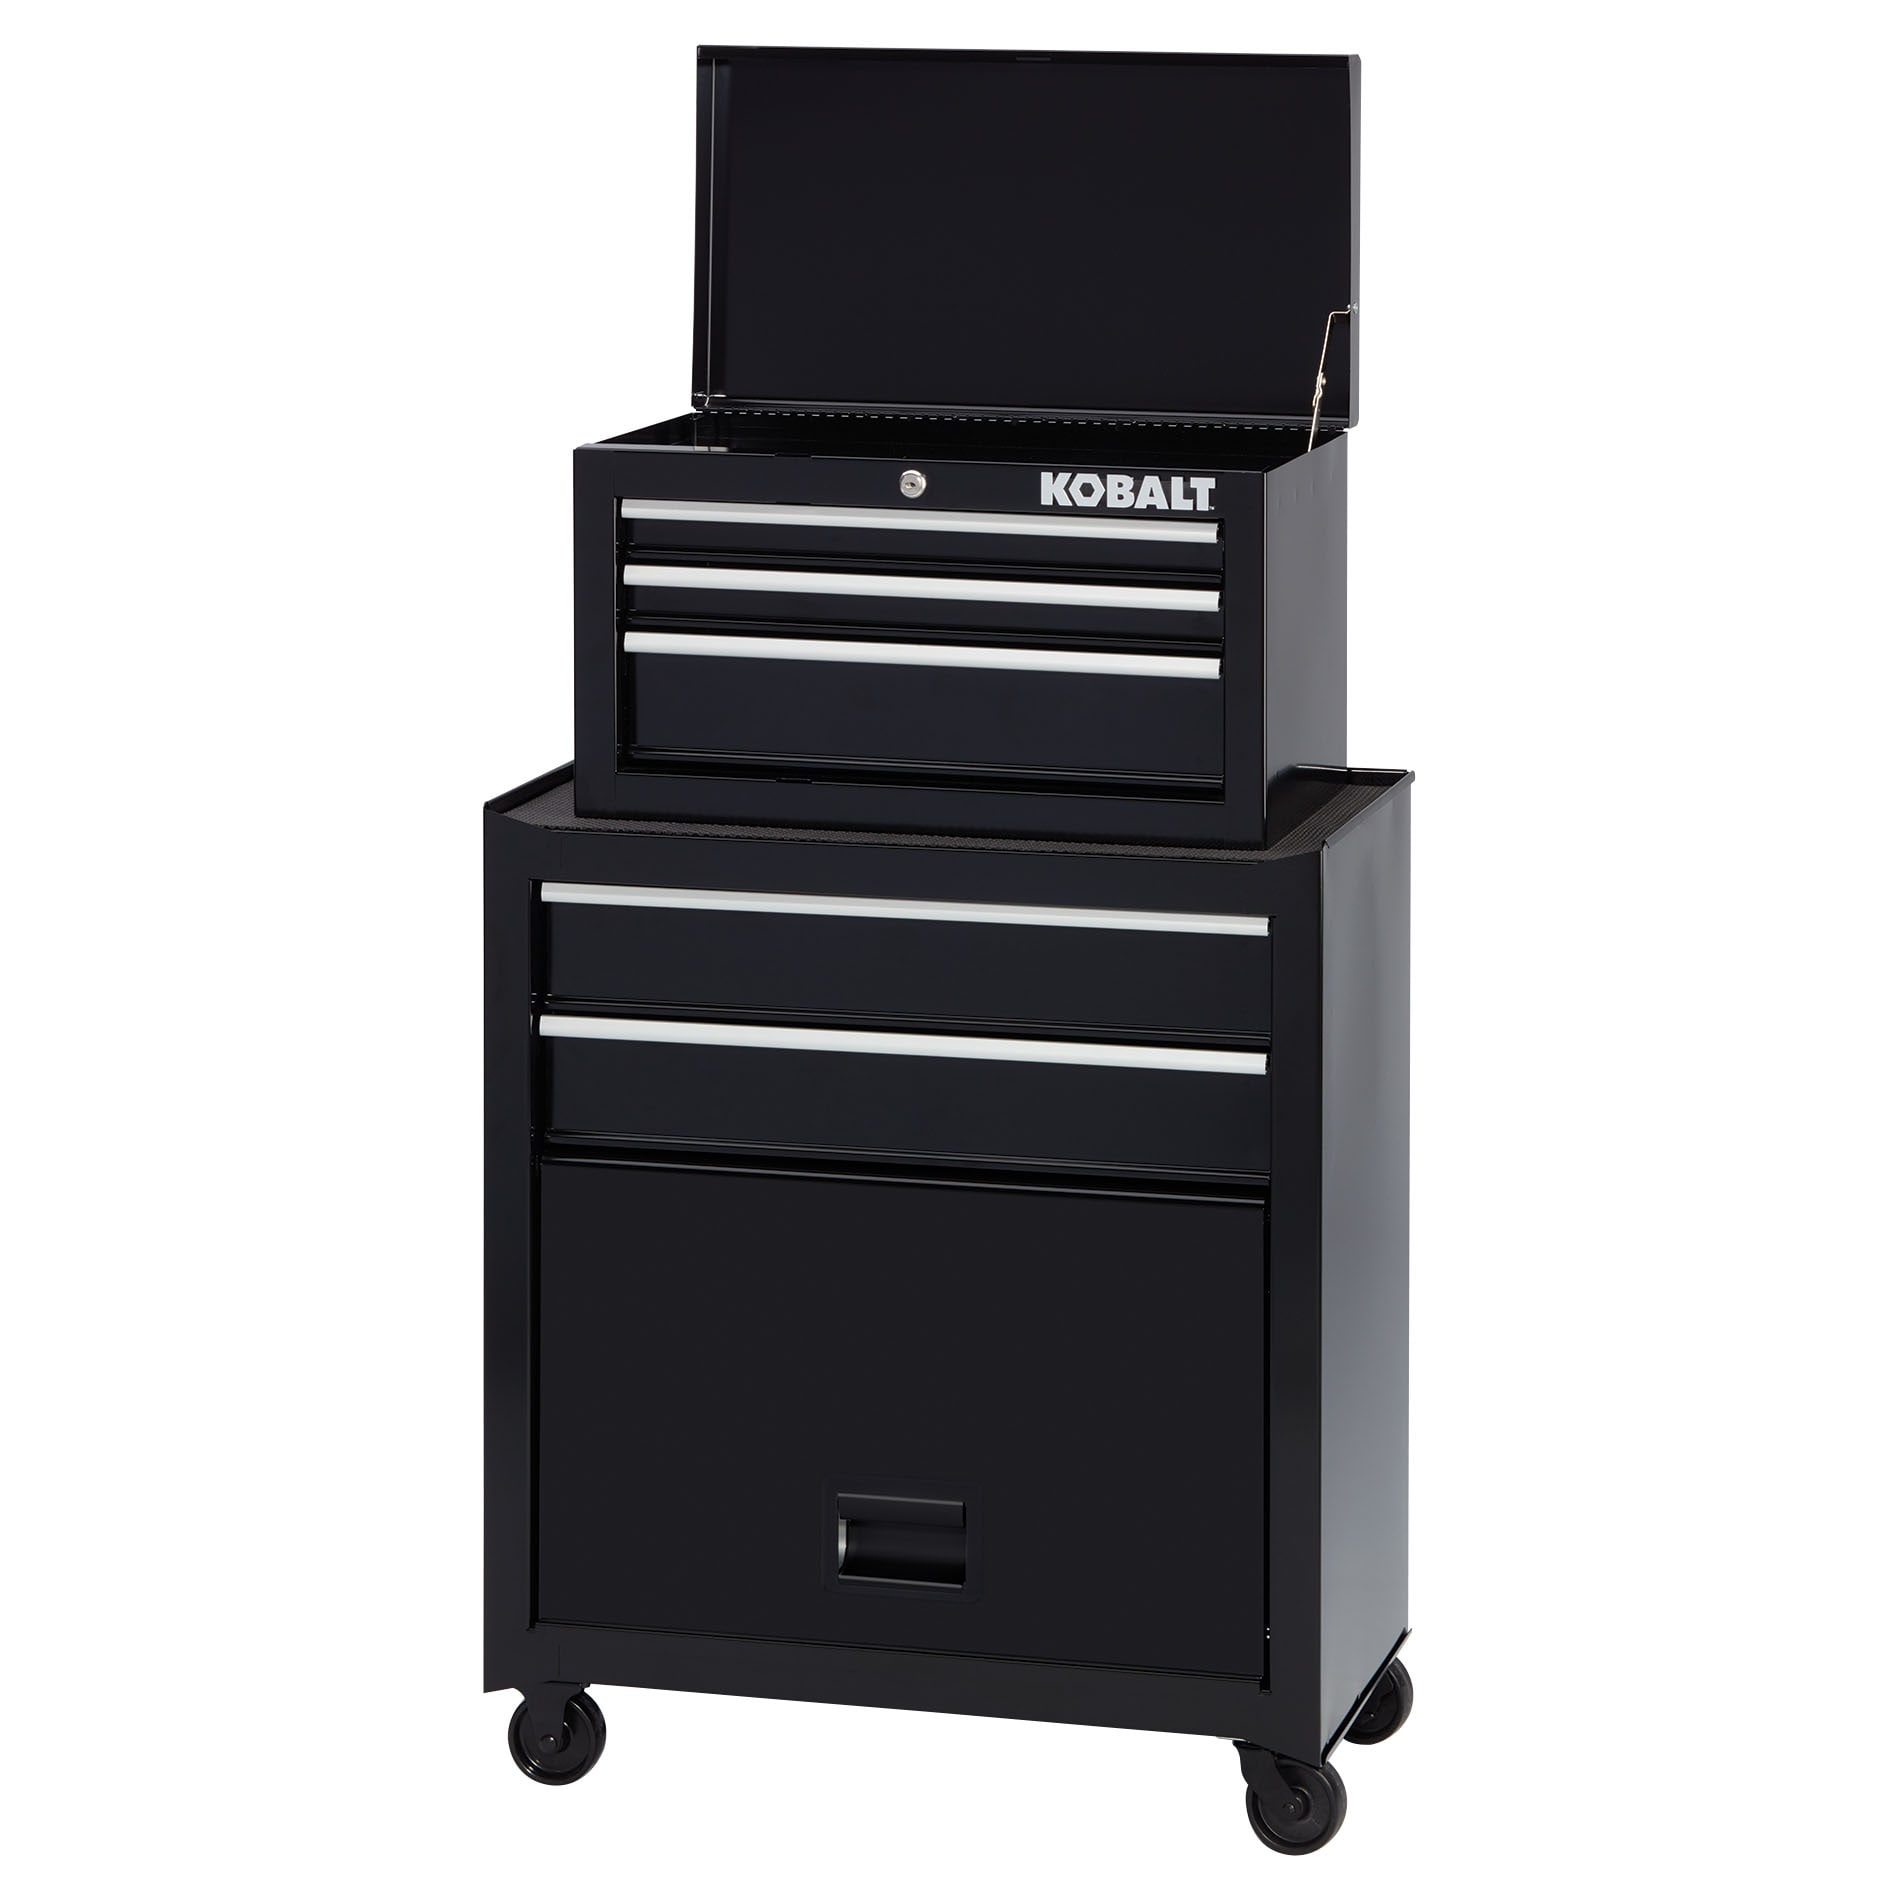 Stanley 11.8-in W x 40.5-in H 5-Drawer Steel Tool Chest (Black) at